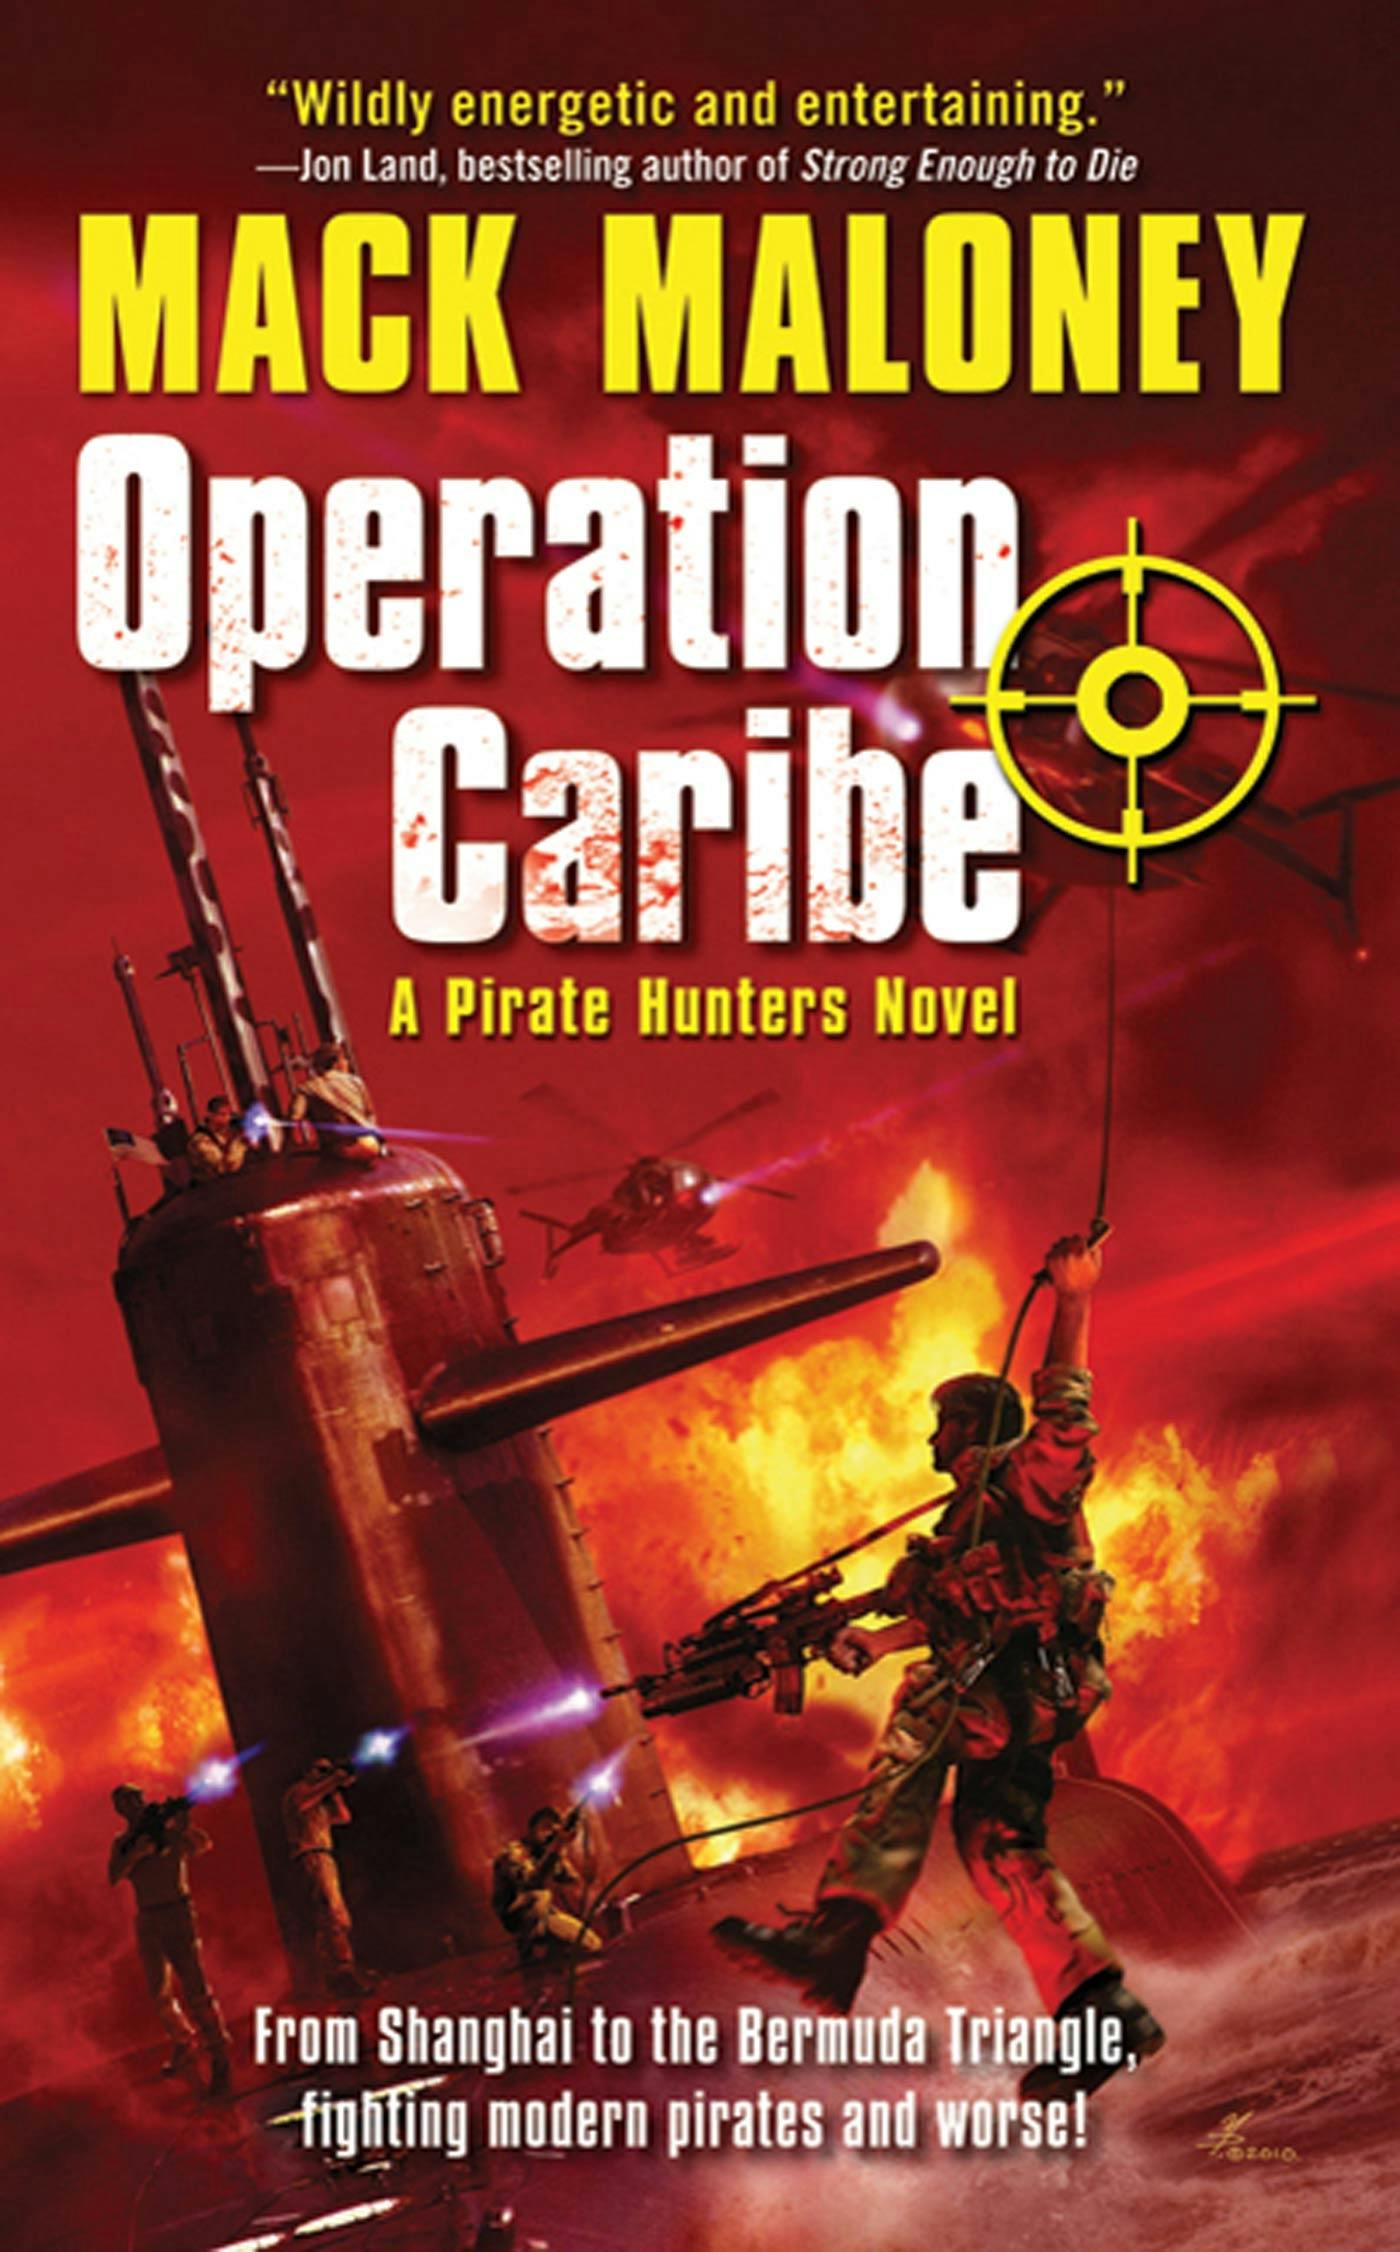 Cover for the book titled as: Operation Caribe